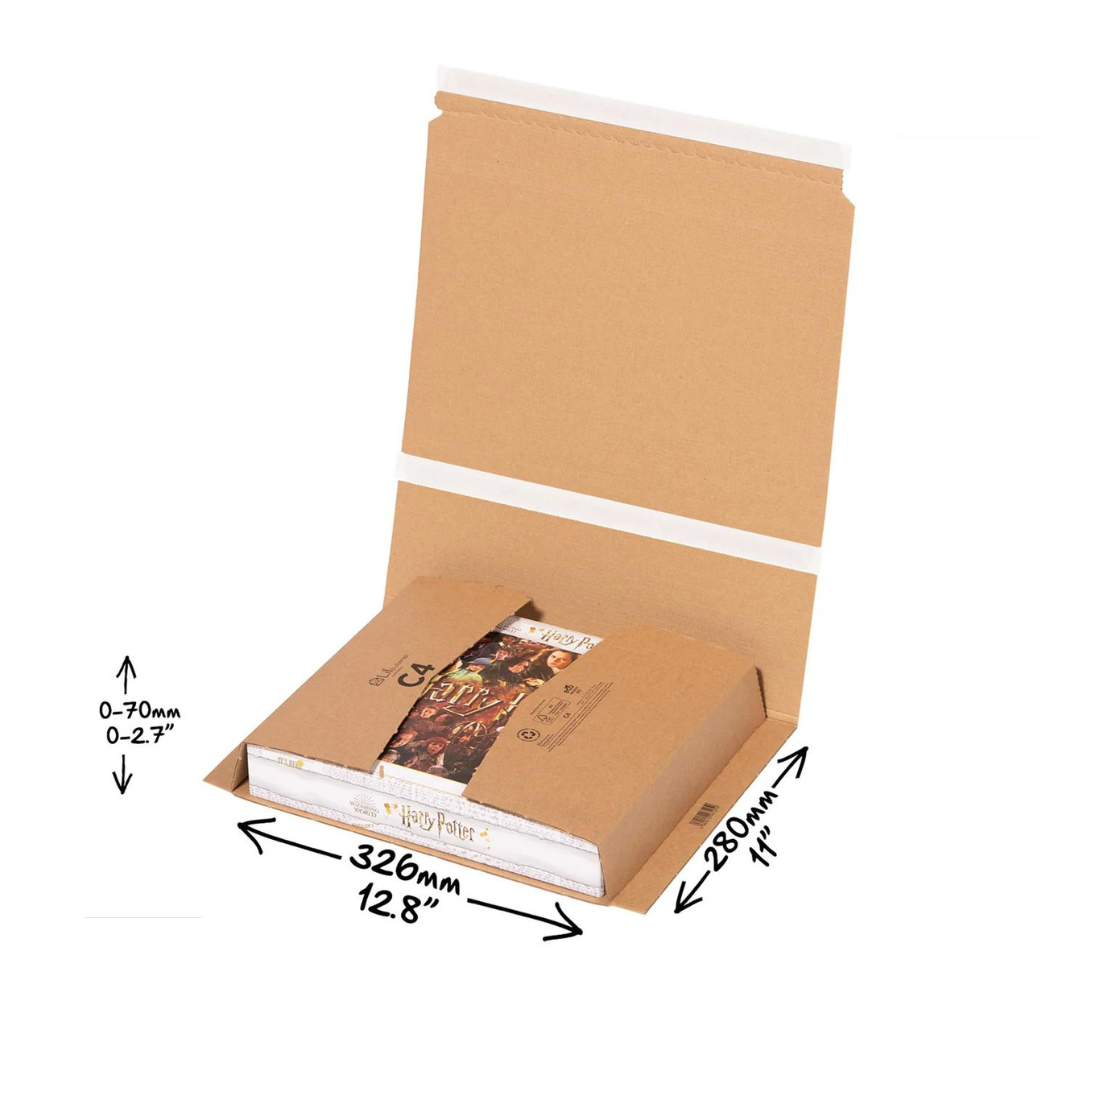 C4 Book Wraps - Ideal for A4 photo albums, yearbooks and A4 size recipe books in hardback format (PACK OF 50)